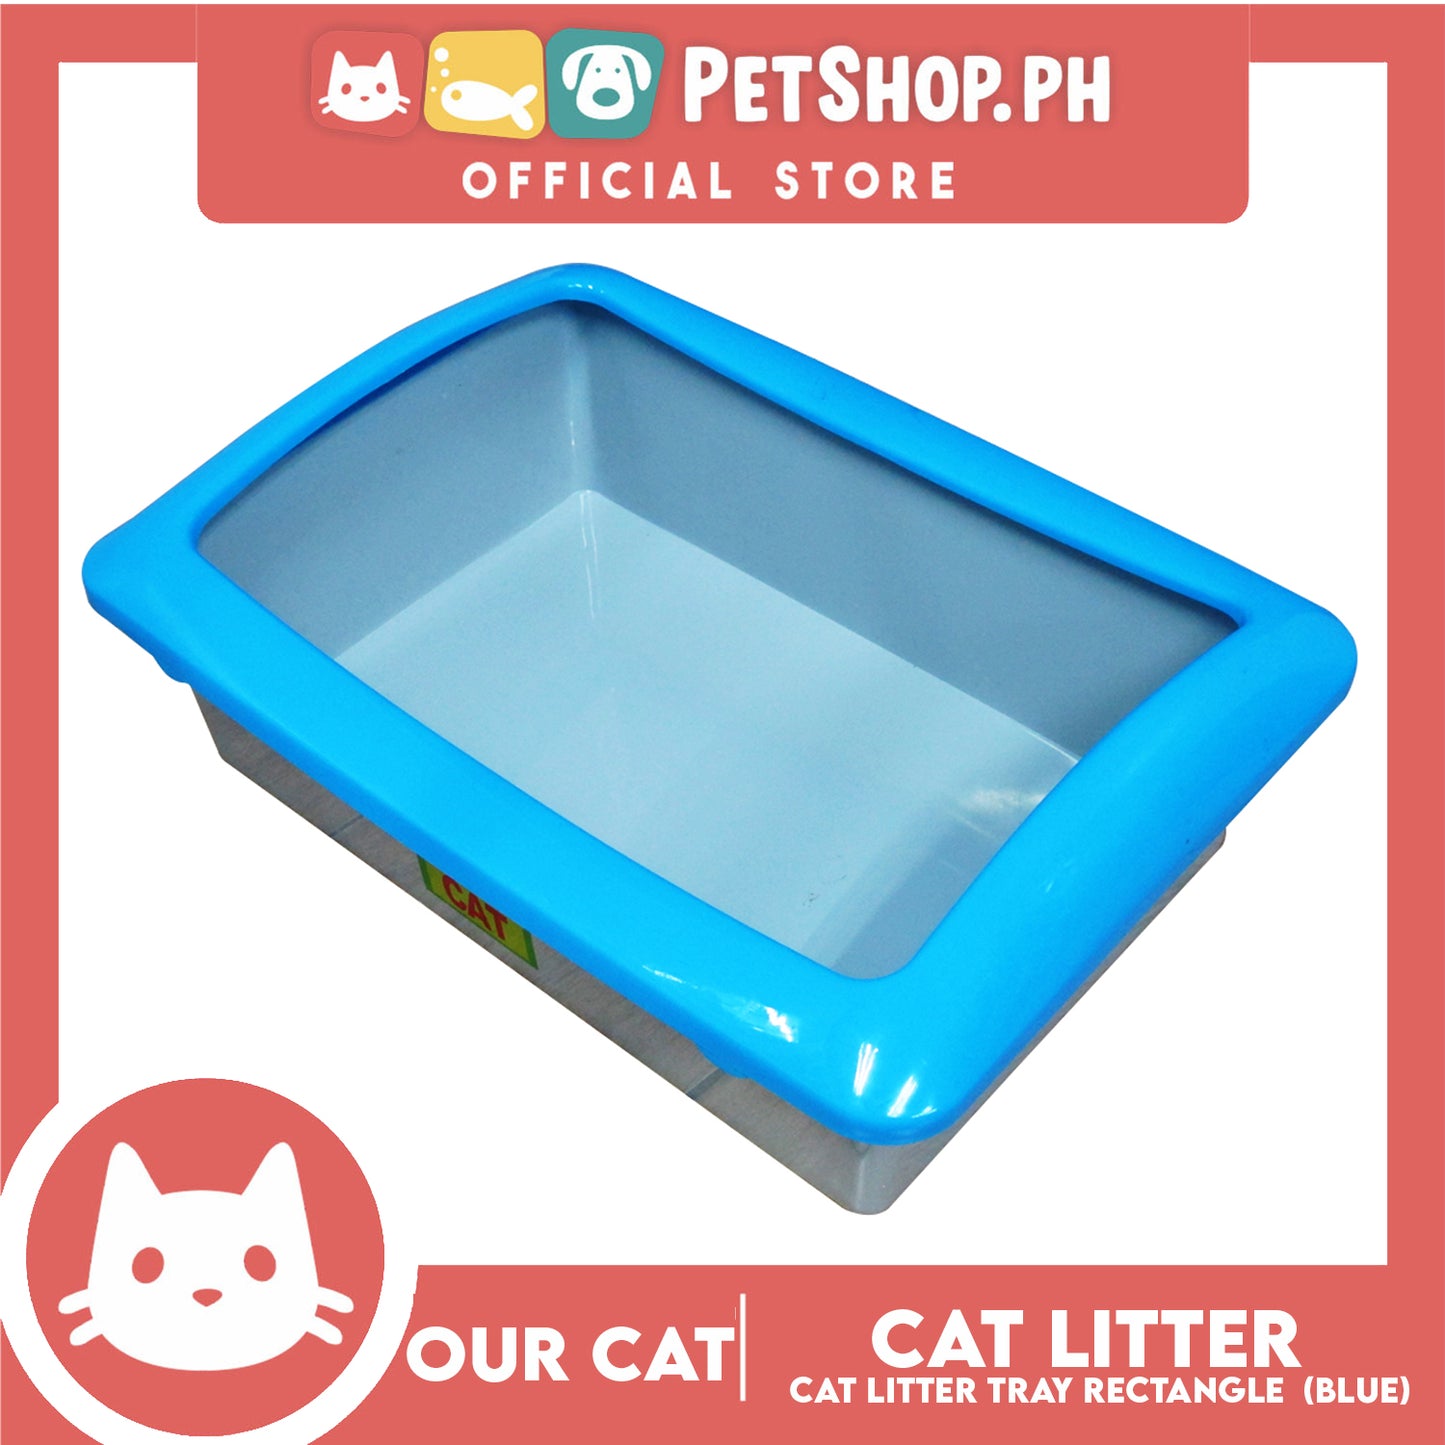 Our Cat Litter Tray Rectangle with Cat Litter Scooper (Blue)